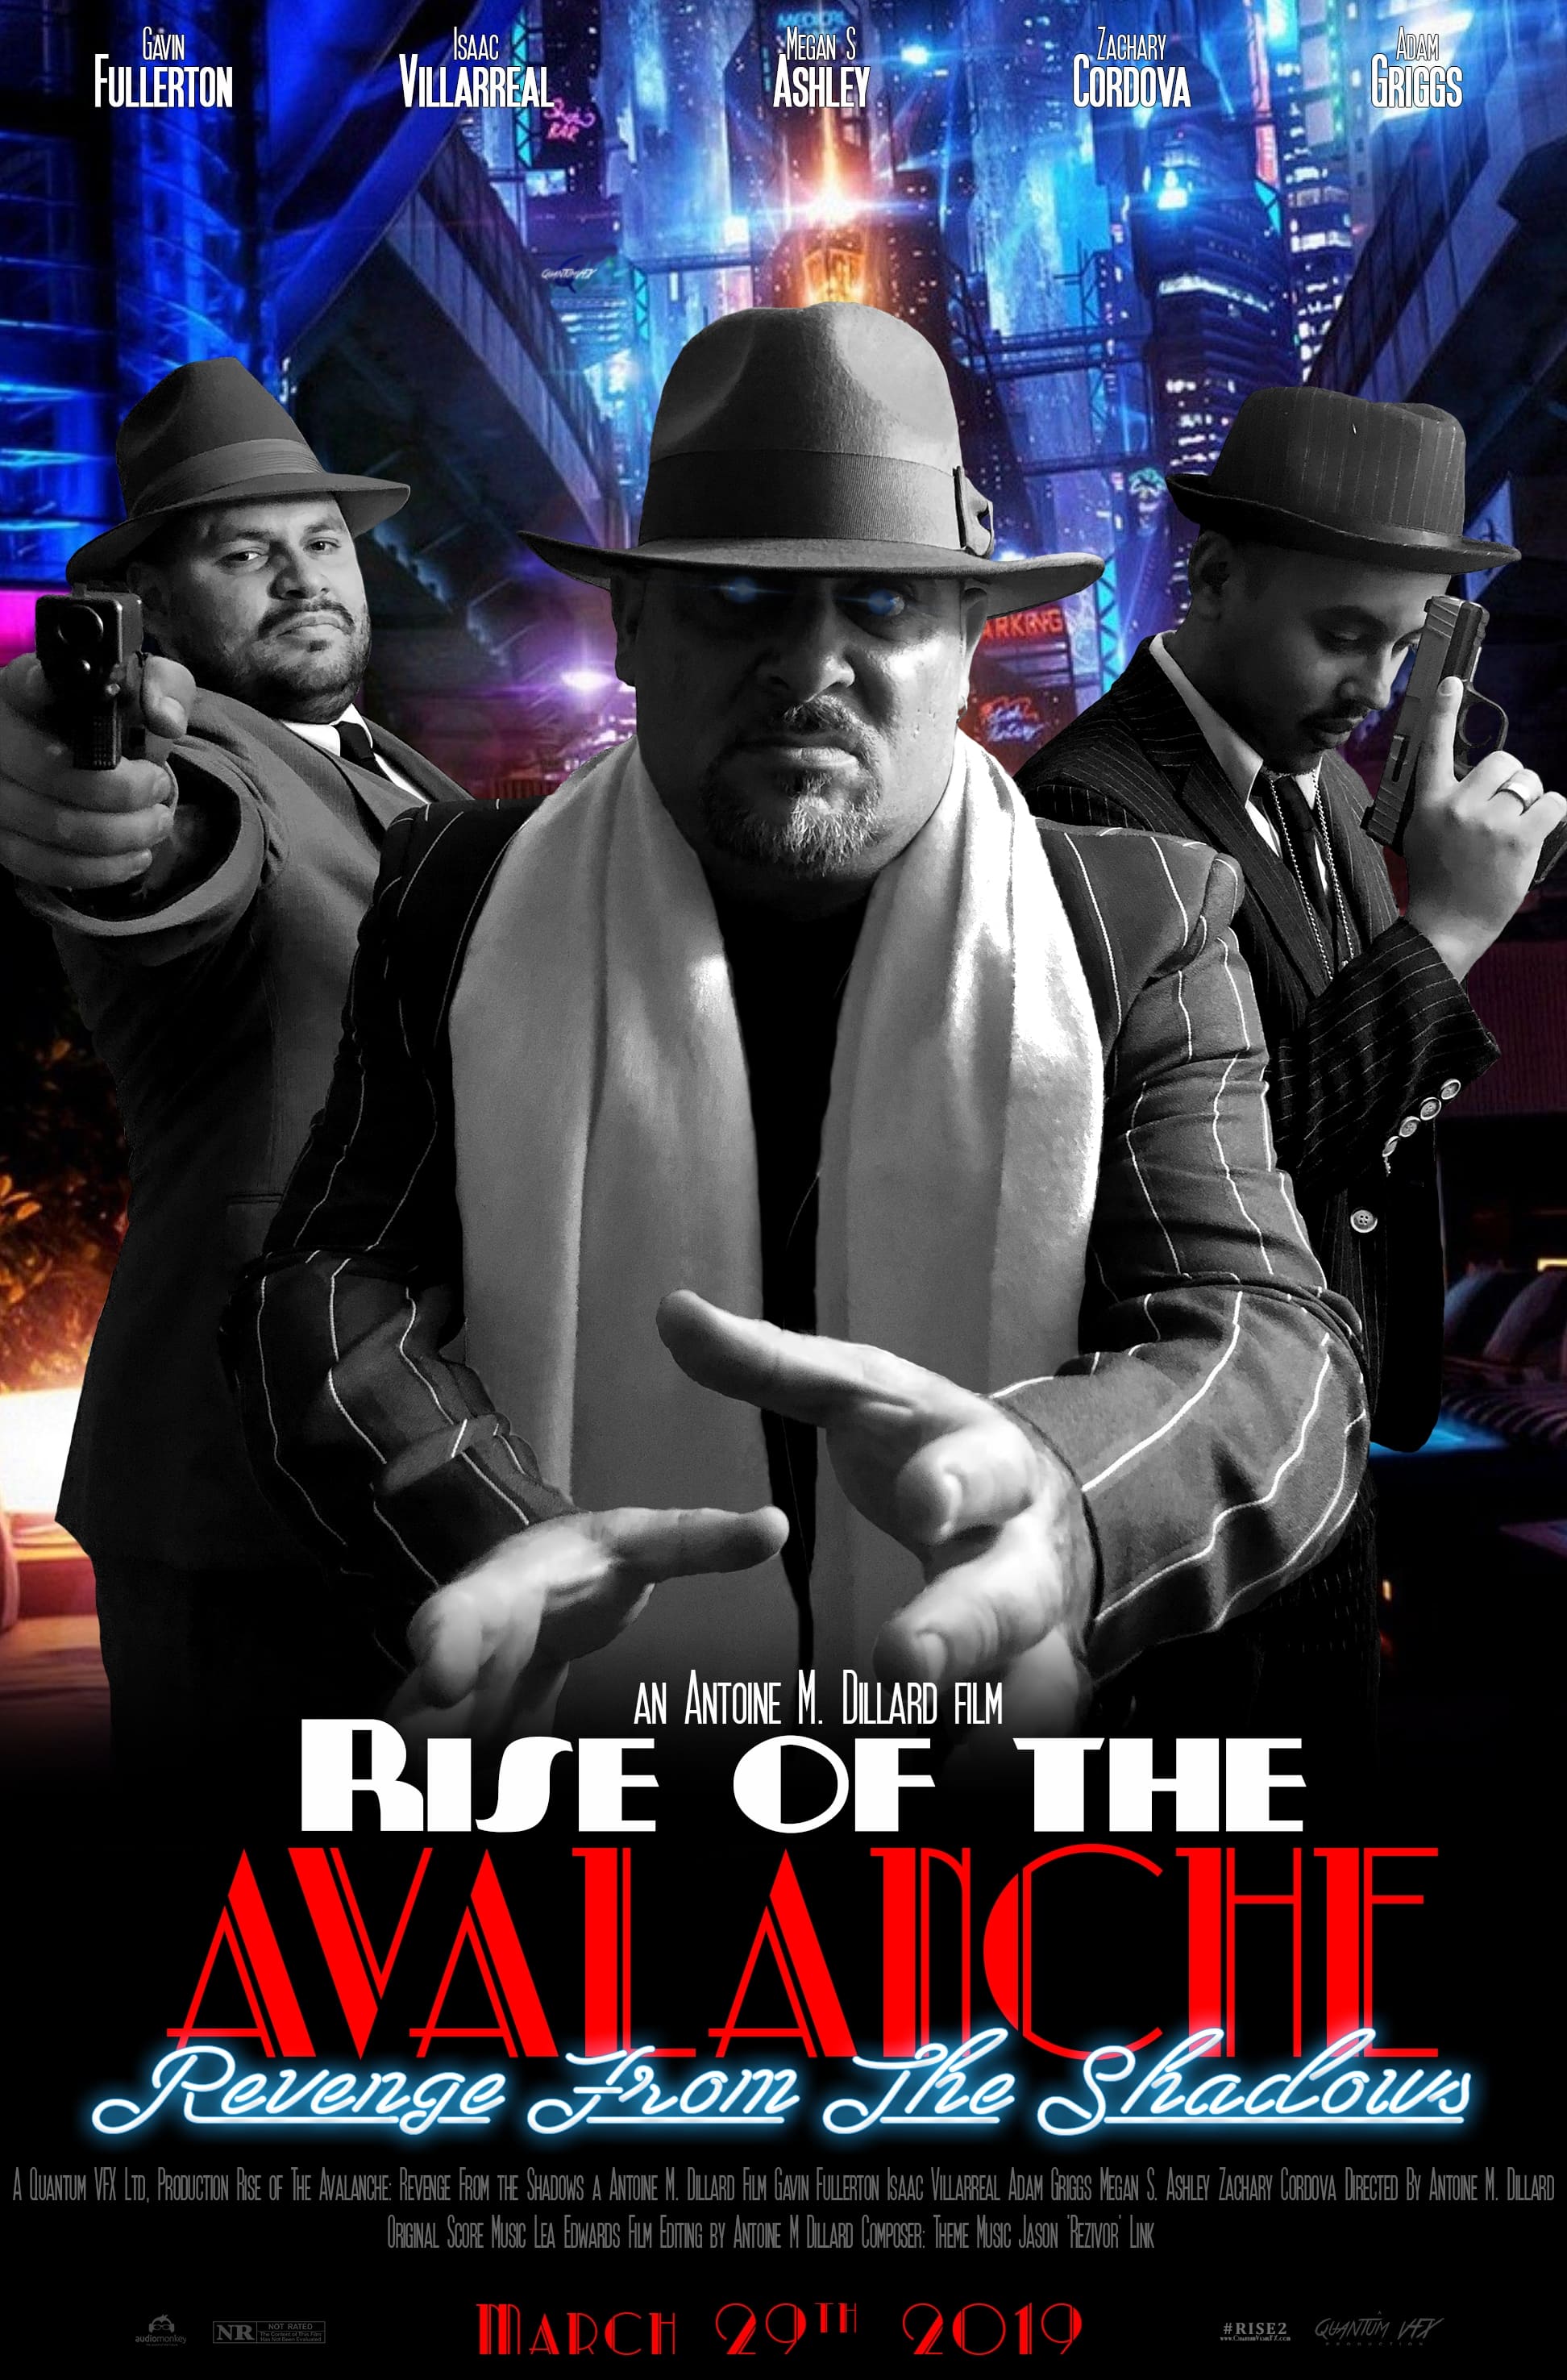 Rise of the Avalanche: Revenge from the Shadows